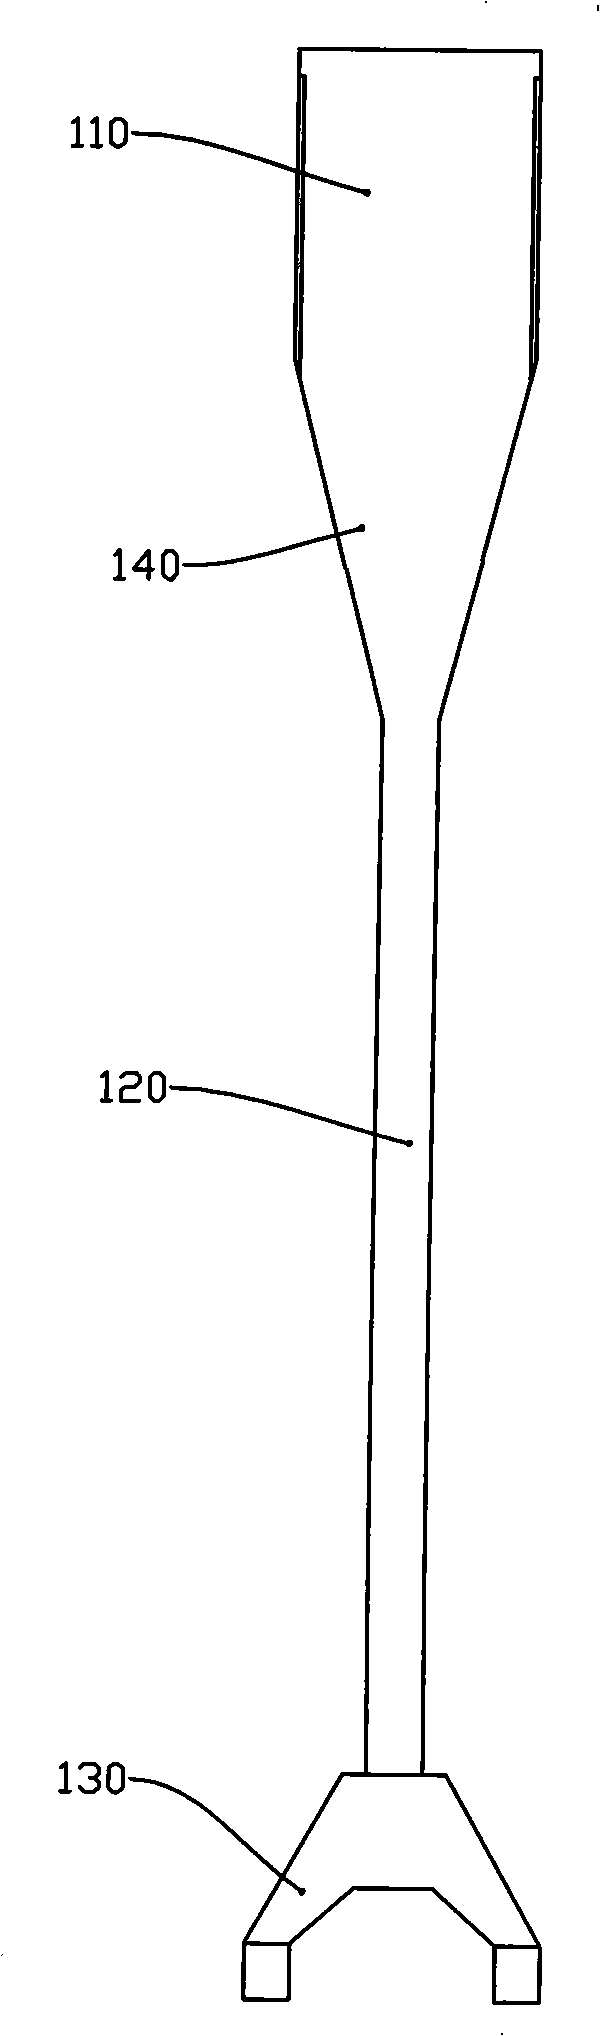 Apparatus for capping sebific duct automatically